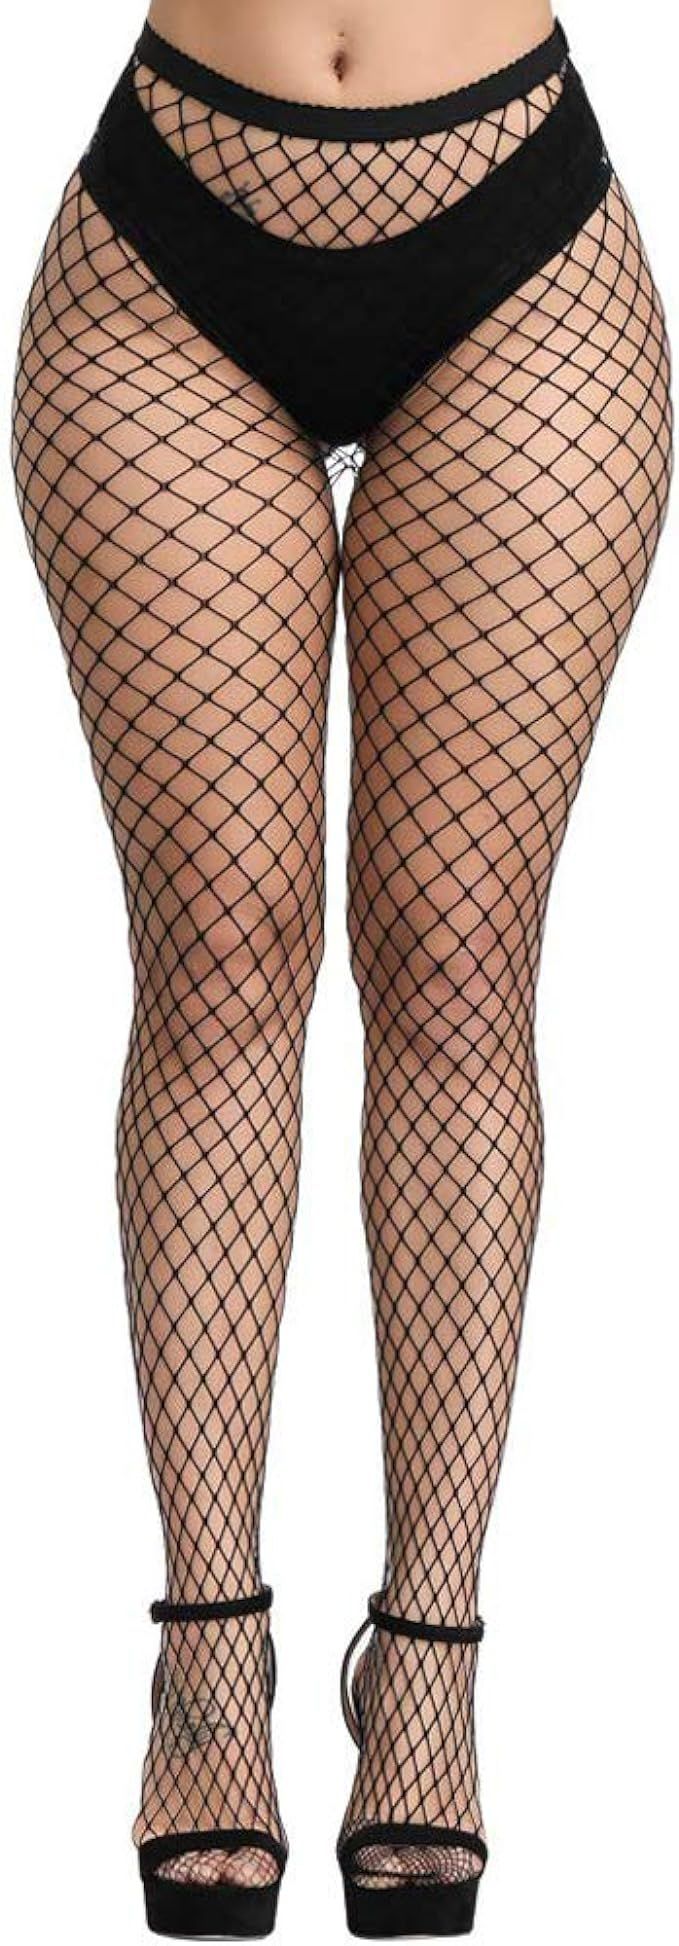 E-Laurels Womens High Waist Patterned Fishnet Tights Suspenders Pantyhose Thigh High Stockings Bl... | Amazon (US)